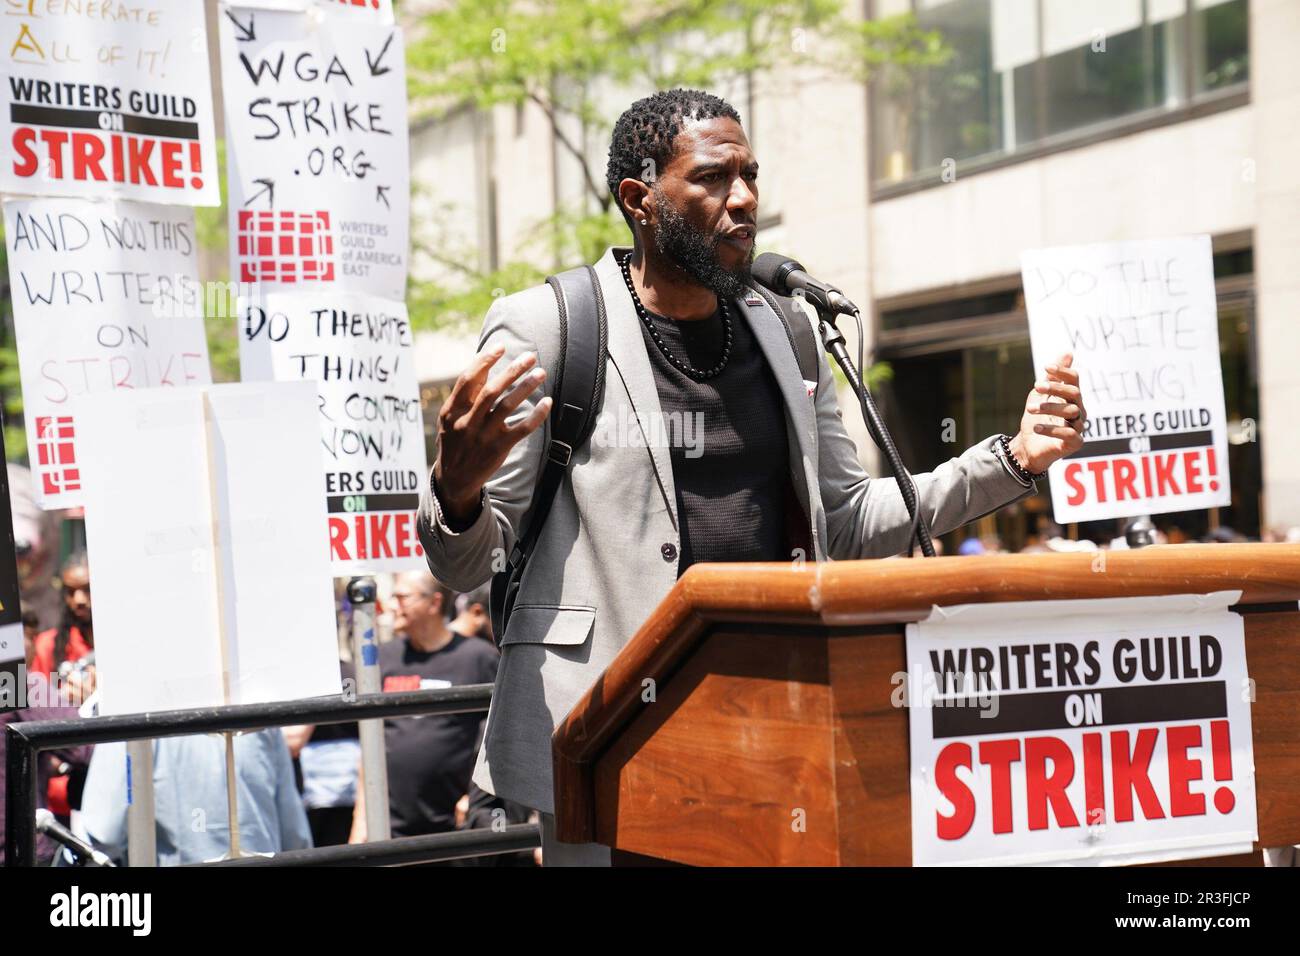 New York, NY, USA. 23rd May, 2023. Jumaane Williams in attendance for The Writers Guild of America WGA Rally at the Rock, NBCUniversal offices at 30 Rock, New York, NY May 23, 2023. Credit: Kristin Callahan/Everett Collection/Alamy Live News Stock Photo